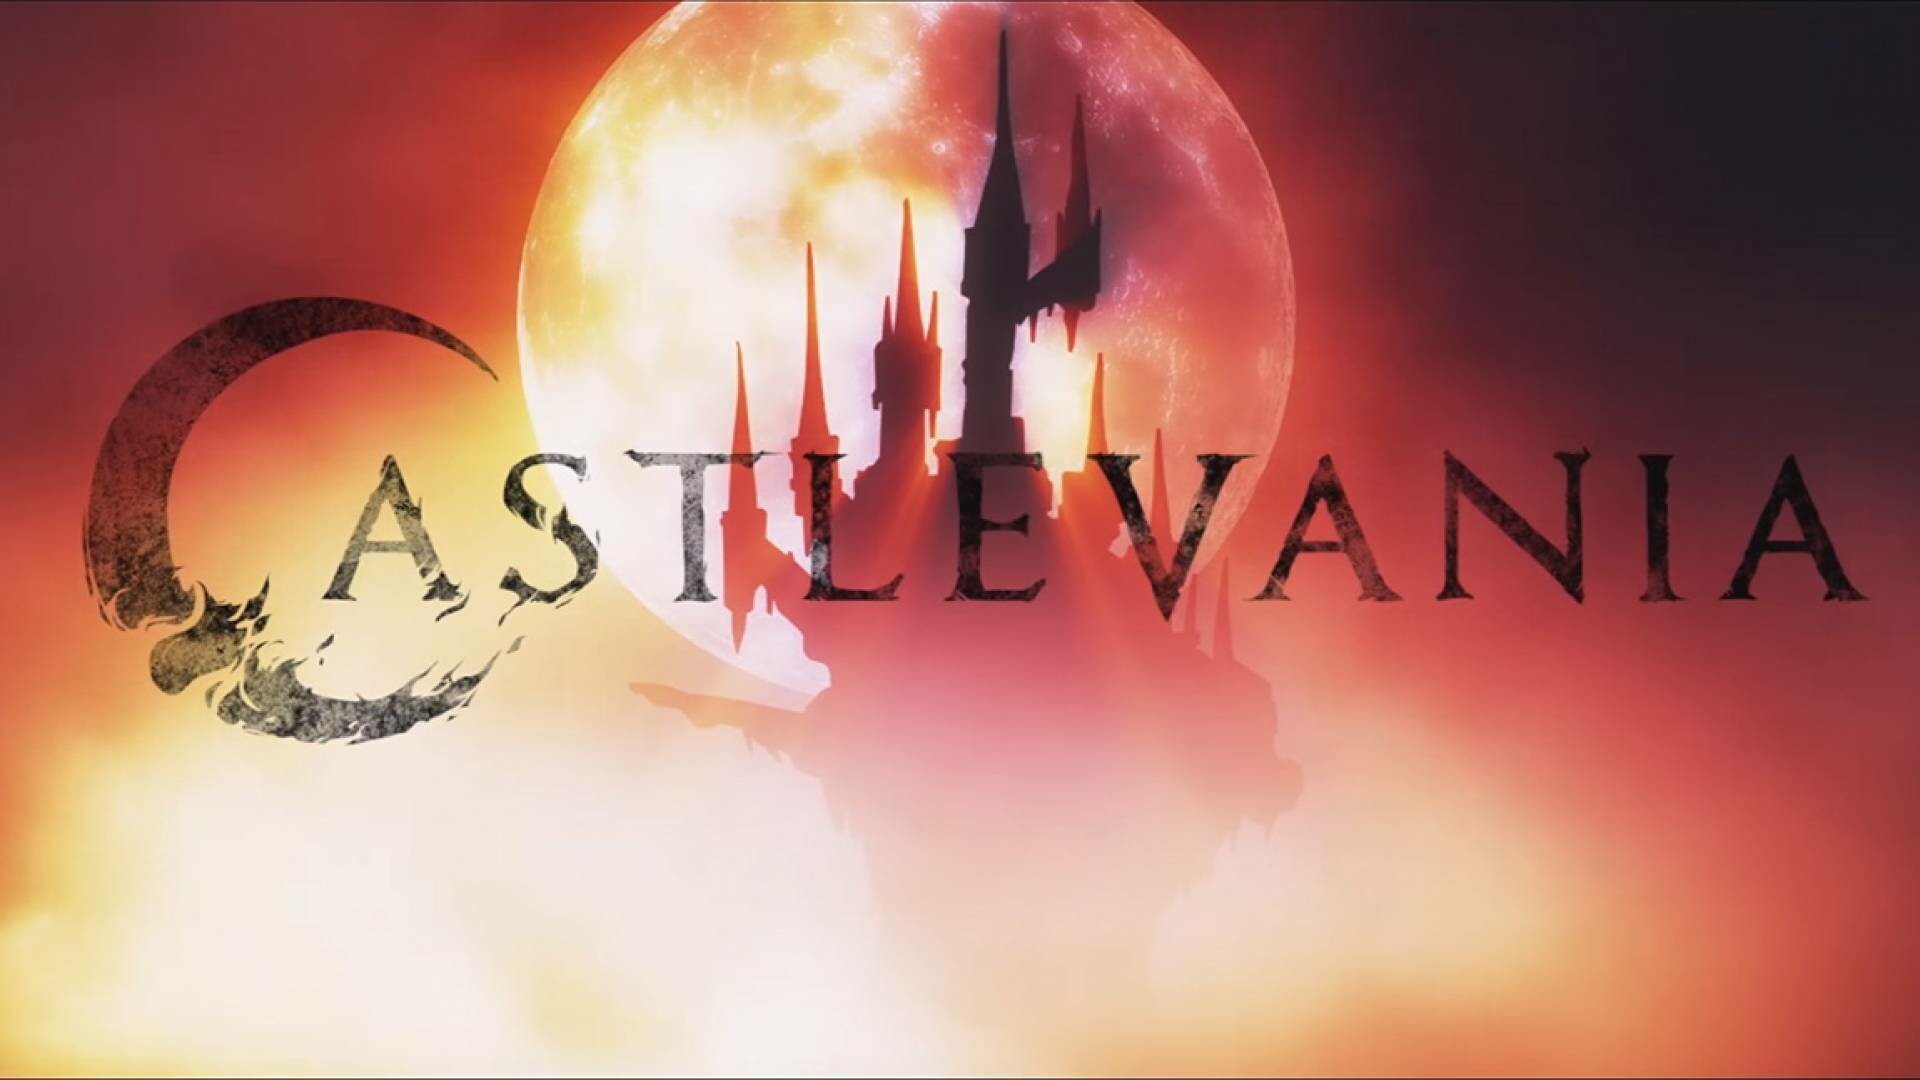 Castlevania (Netflix): Animated series, The art style is heavily influenced by Japanese animation and Ayami Kojima's artwork. 1920x1080 Full HD Wallpaper.